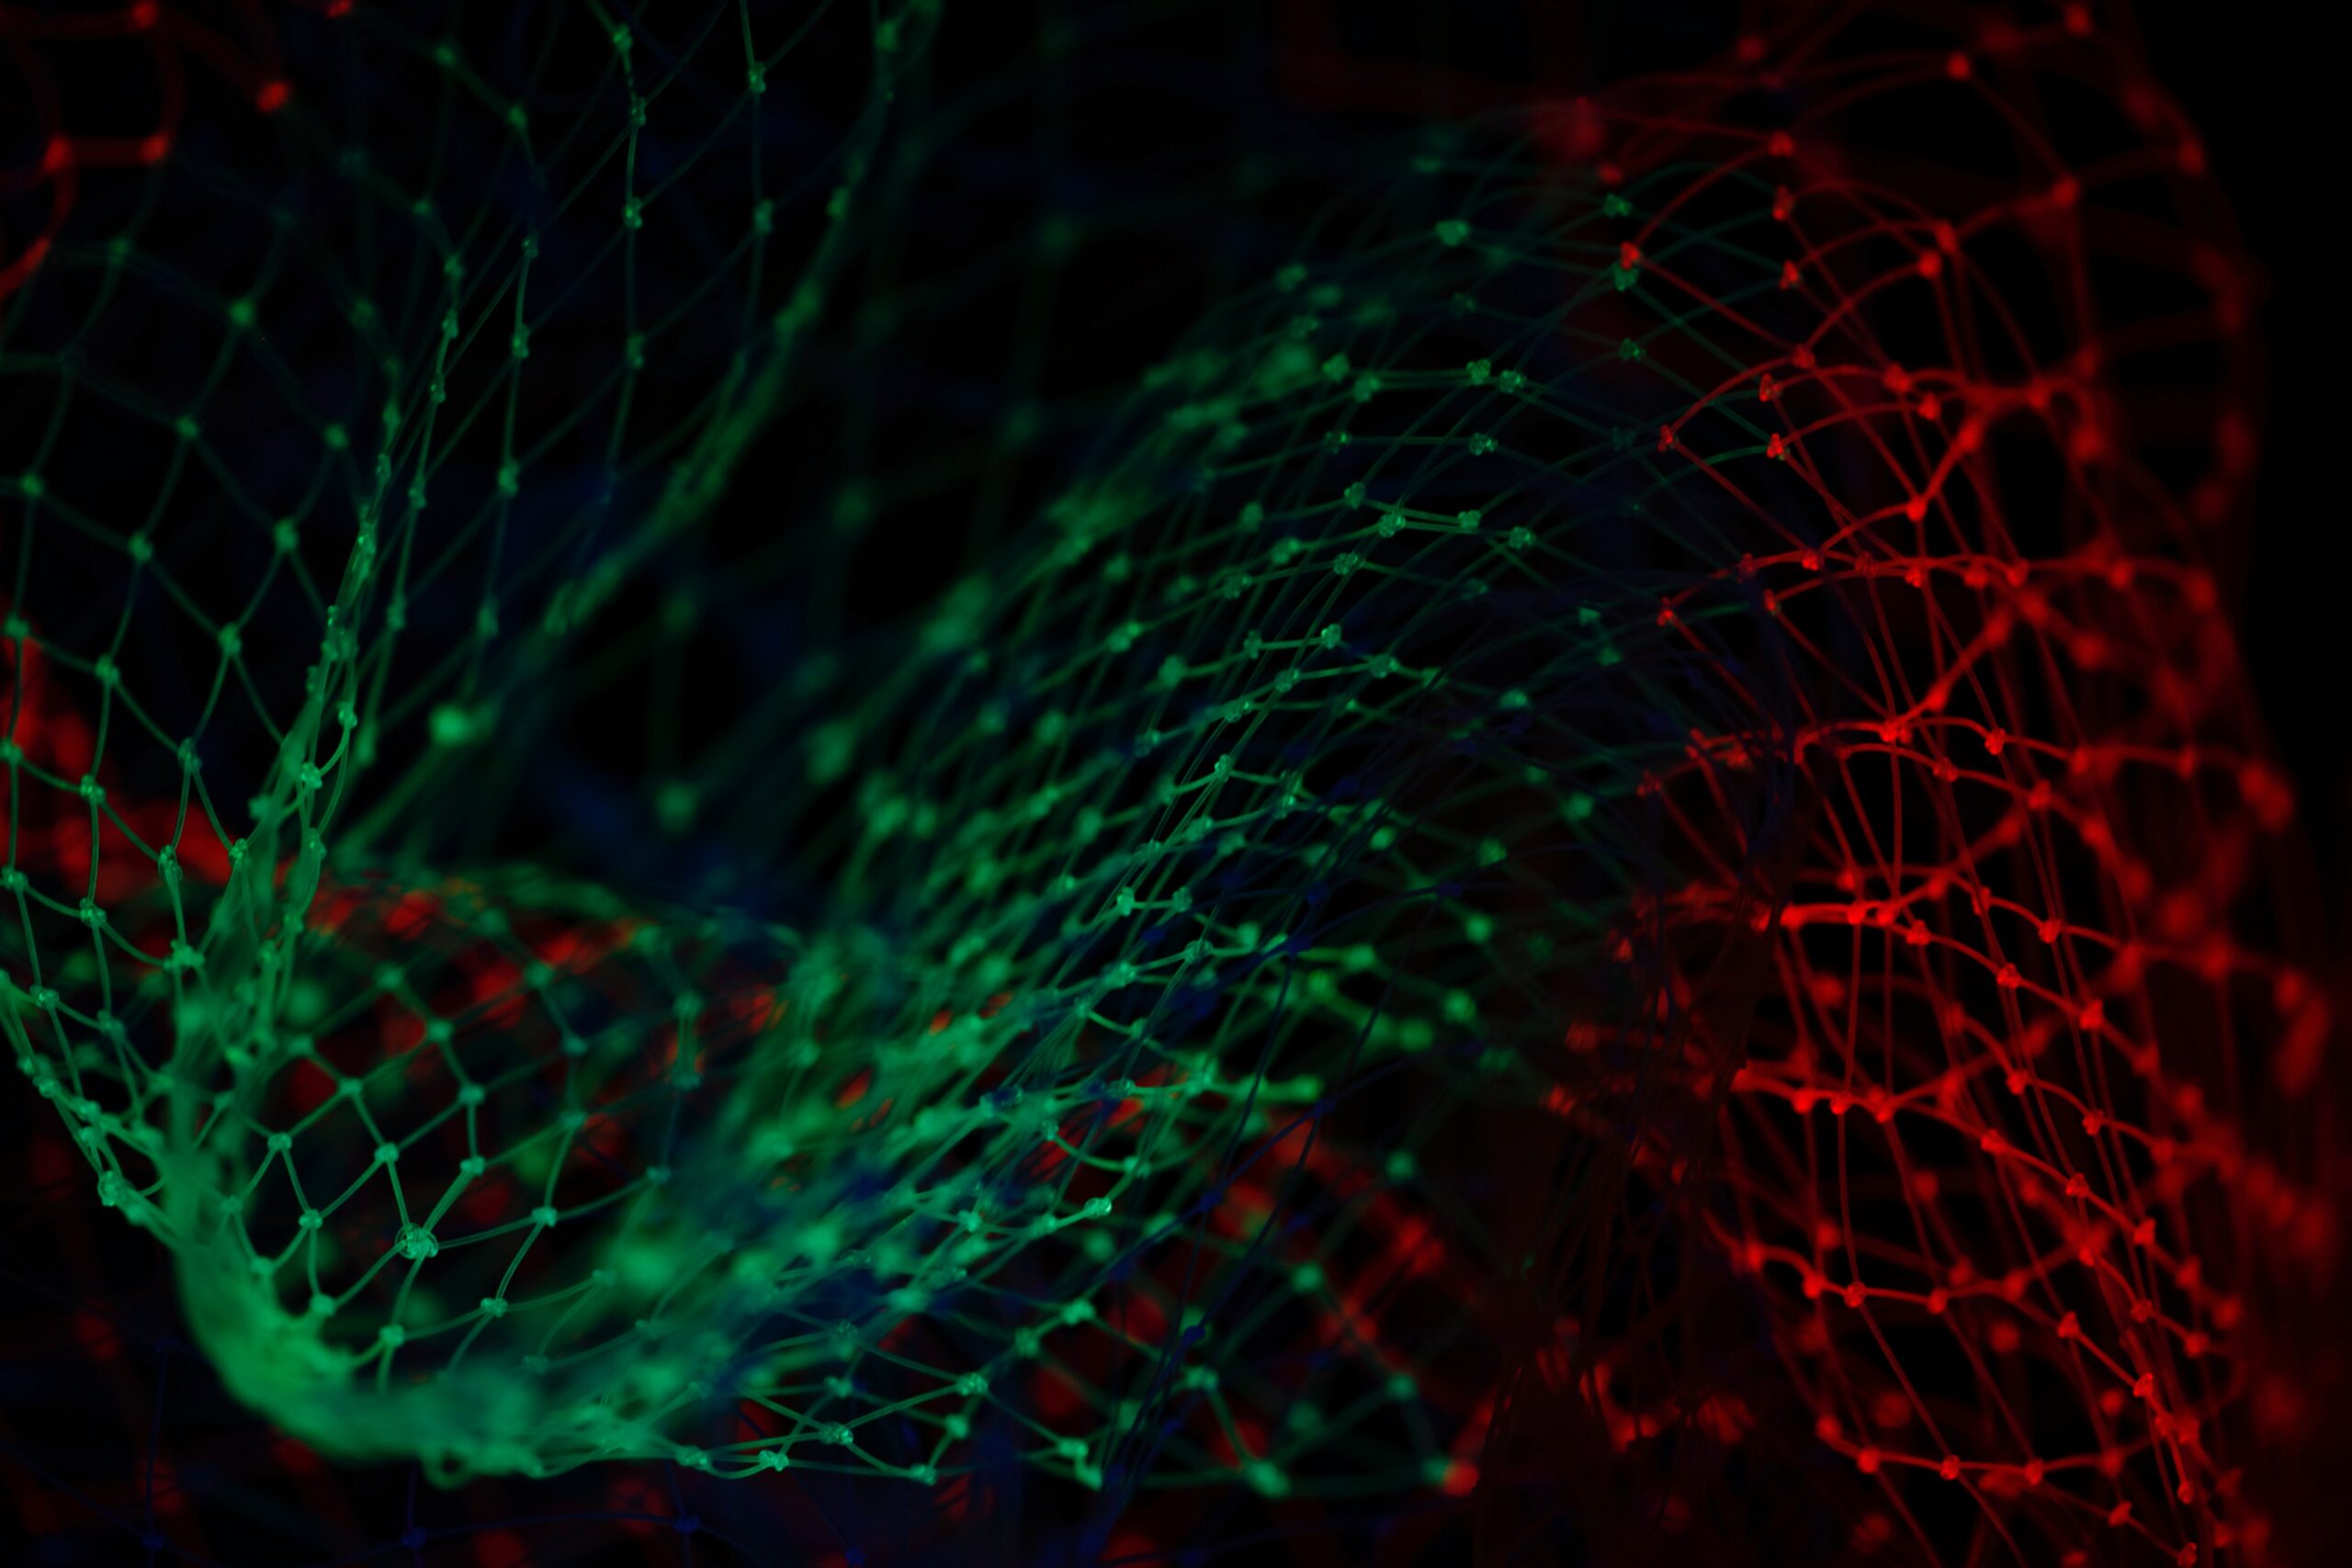 Green, red and blue light reflecting off netting over black background.